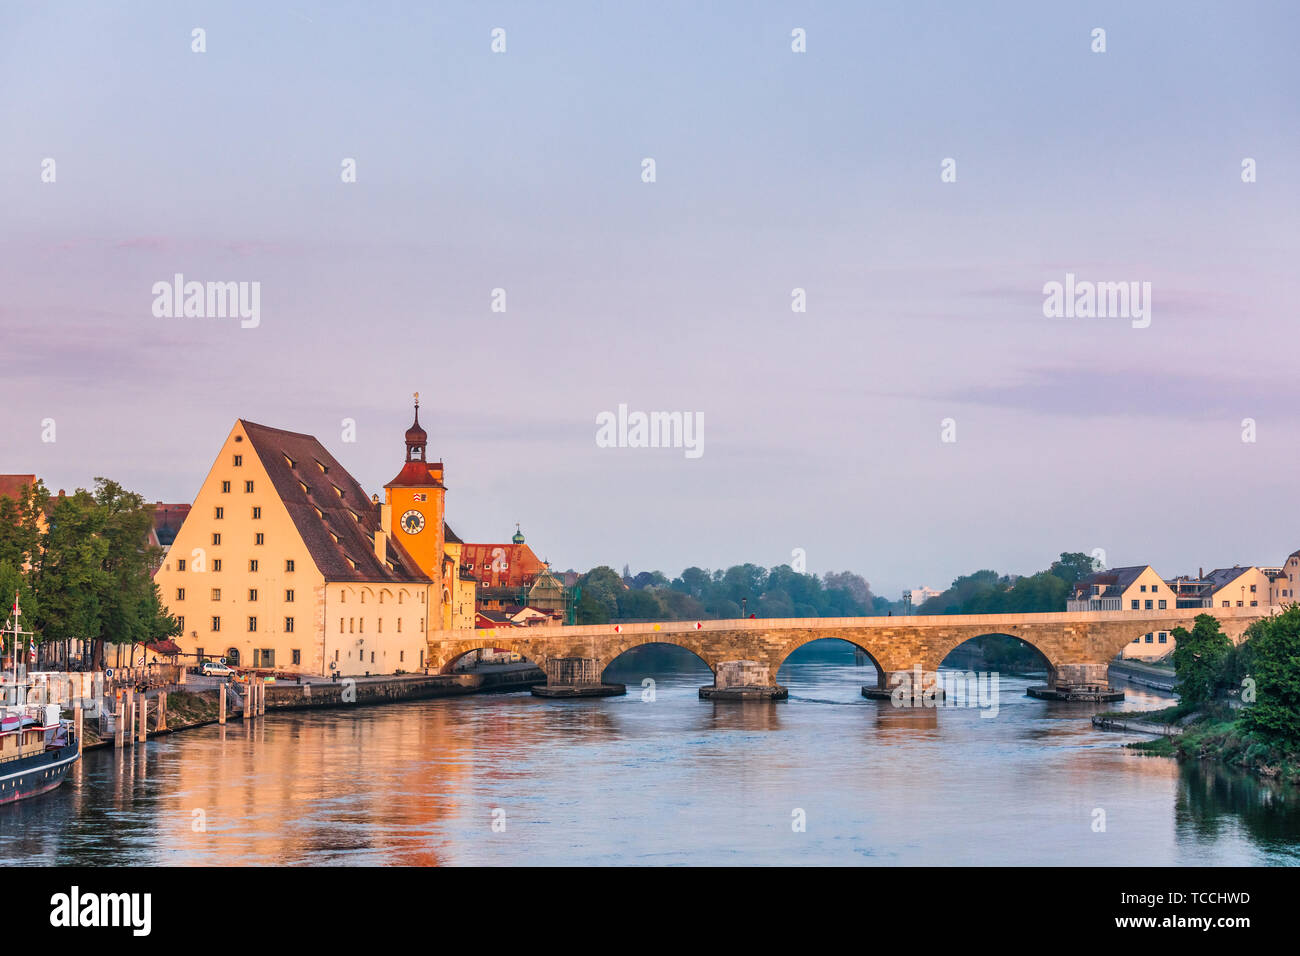 Regensburg cityscape with the medieval Stone Bridge (Steinerne Brücke) over the Danube river, Bavaria, Germany, Europe. Regensburg in one of most popu Stock Photo